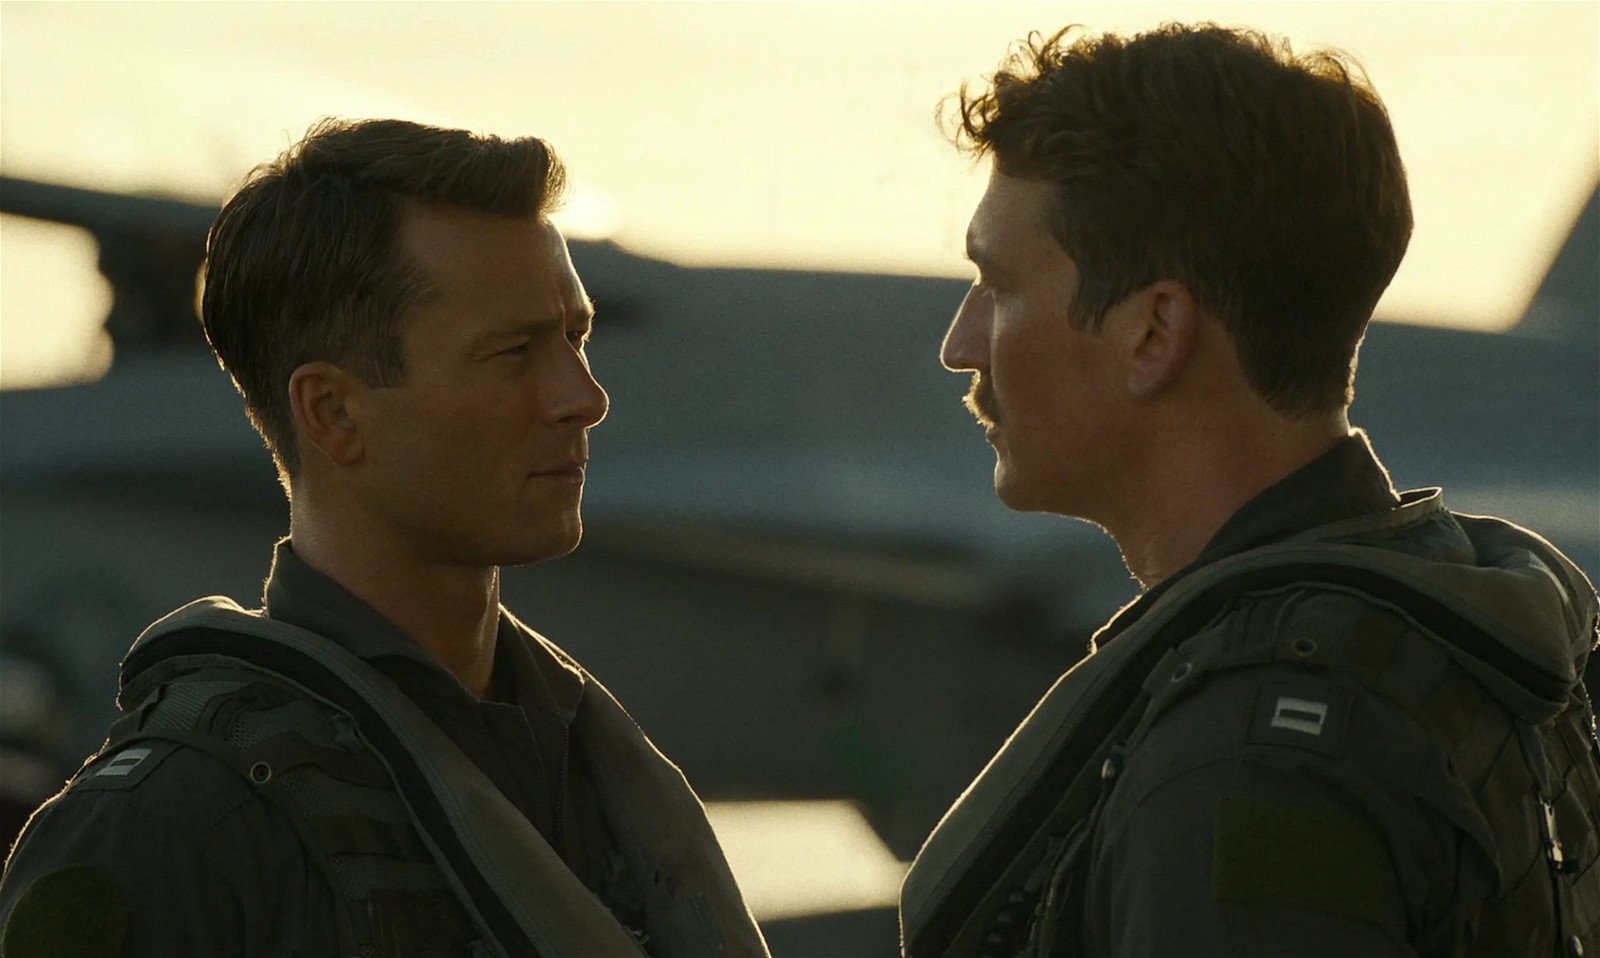 Hangman and Rooster share a moment before taking off in Top Gun: Maverick